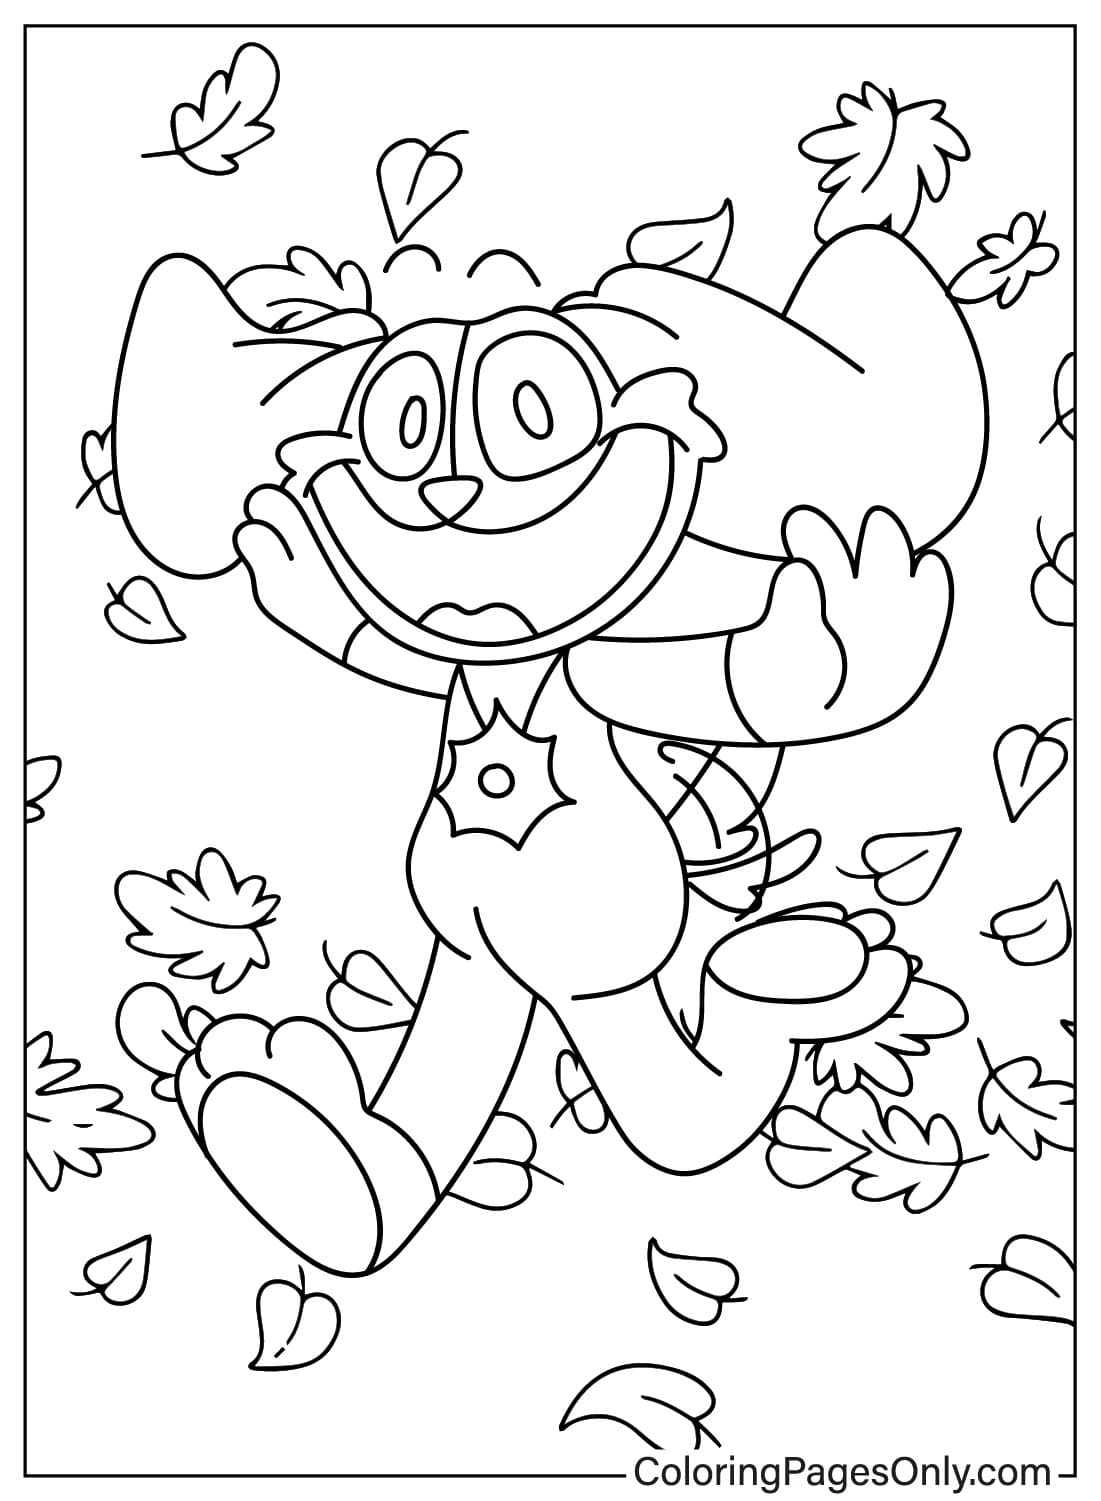 Coloring Page DogDay from DogDay